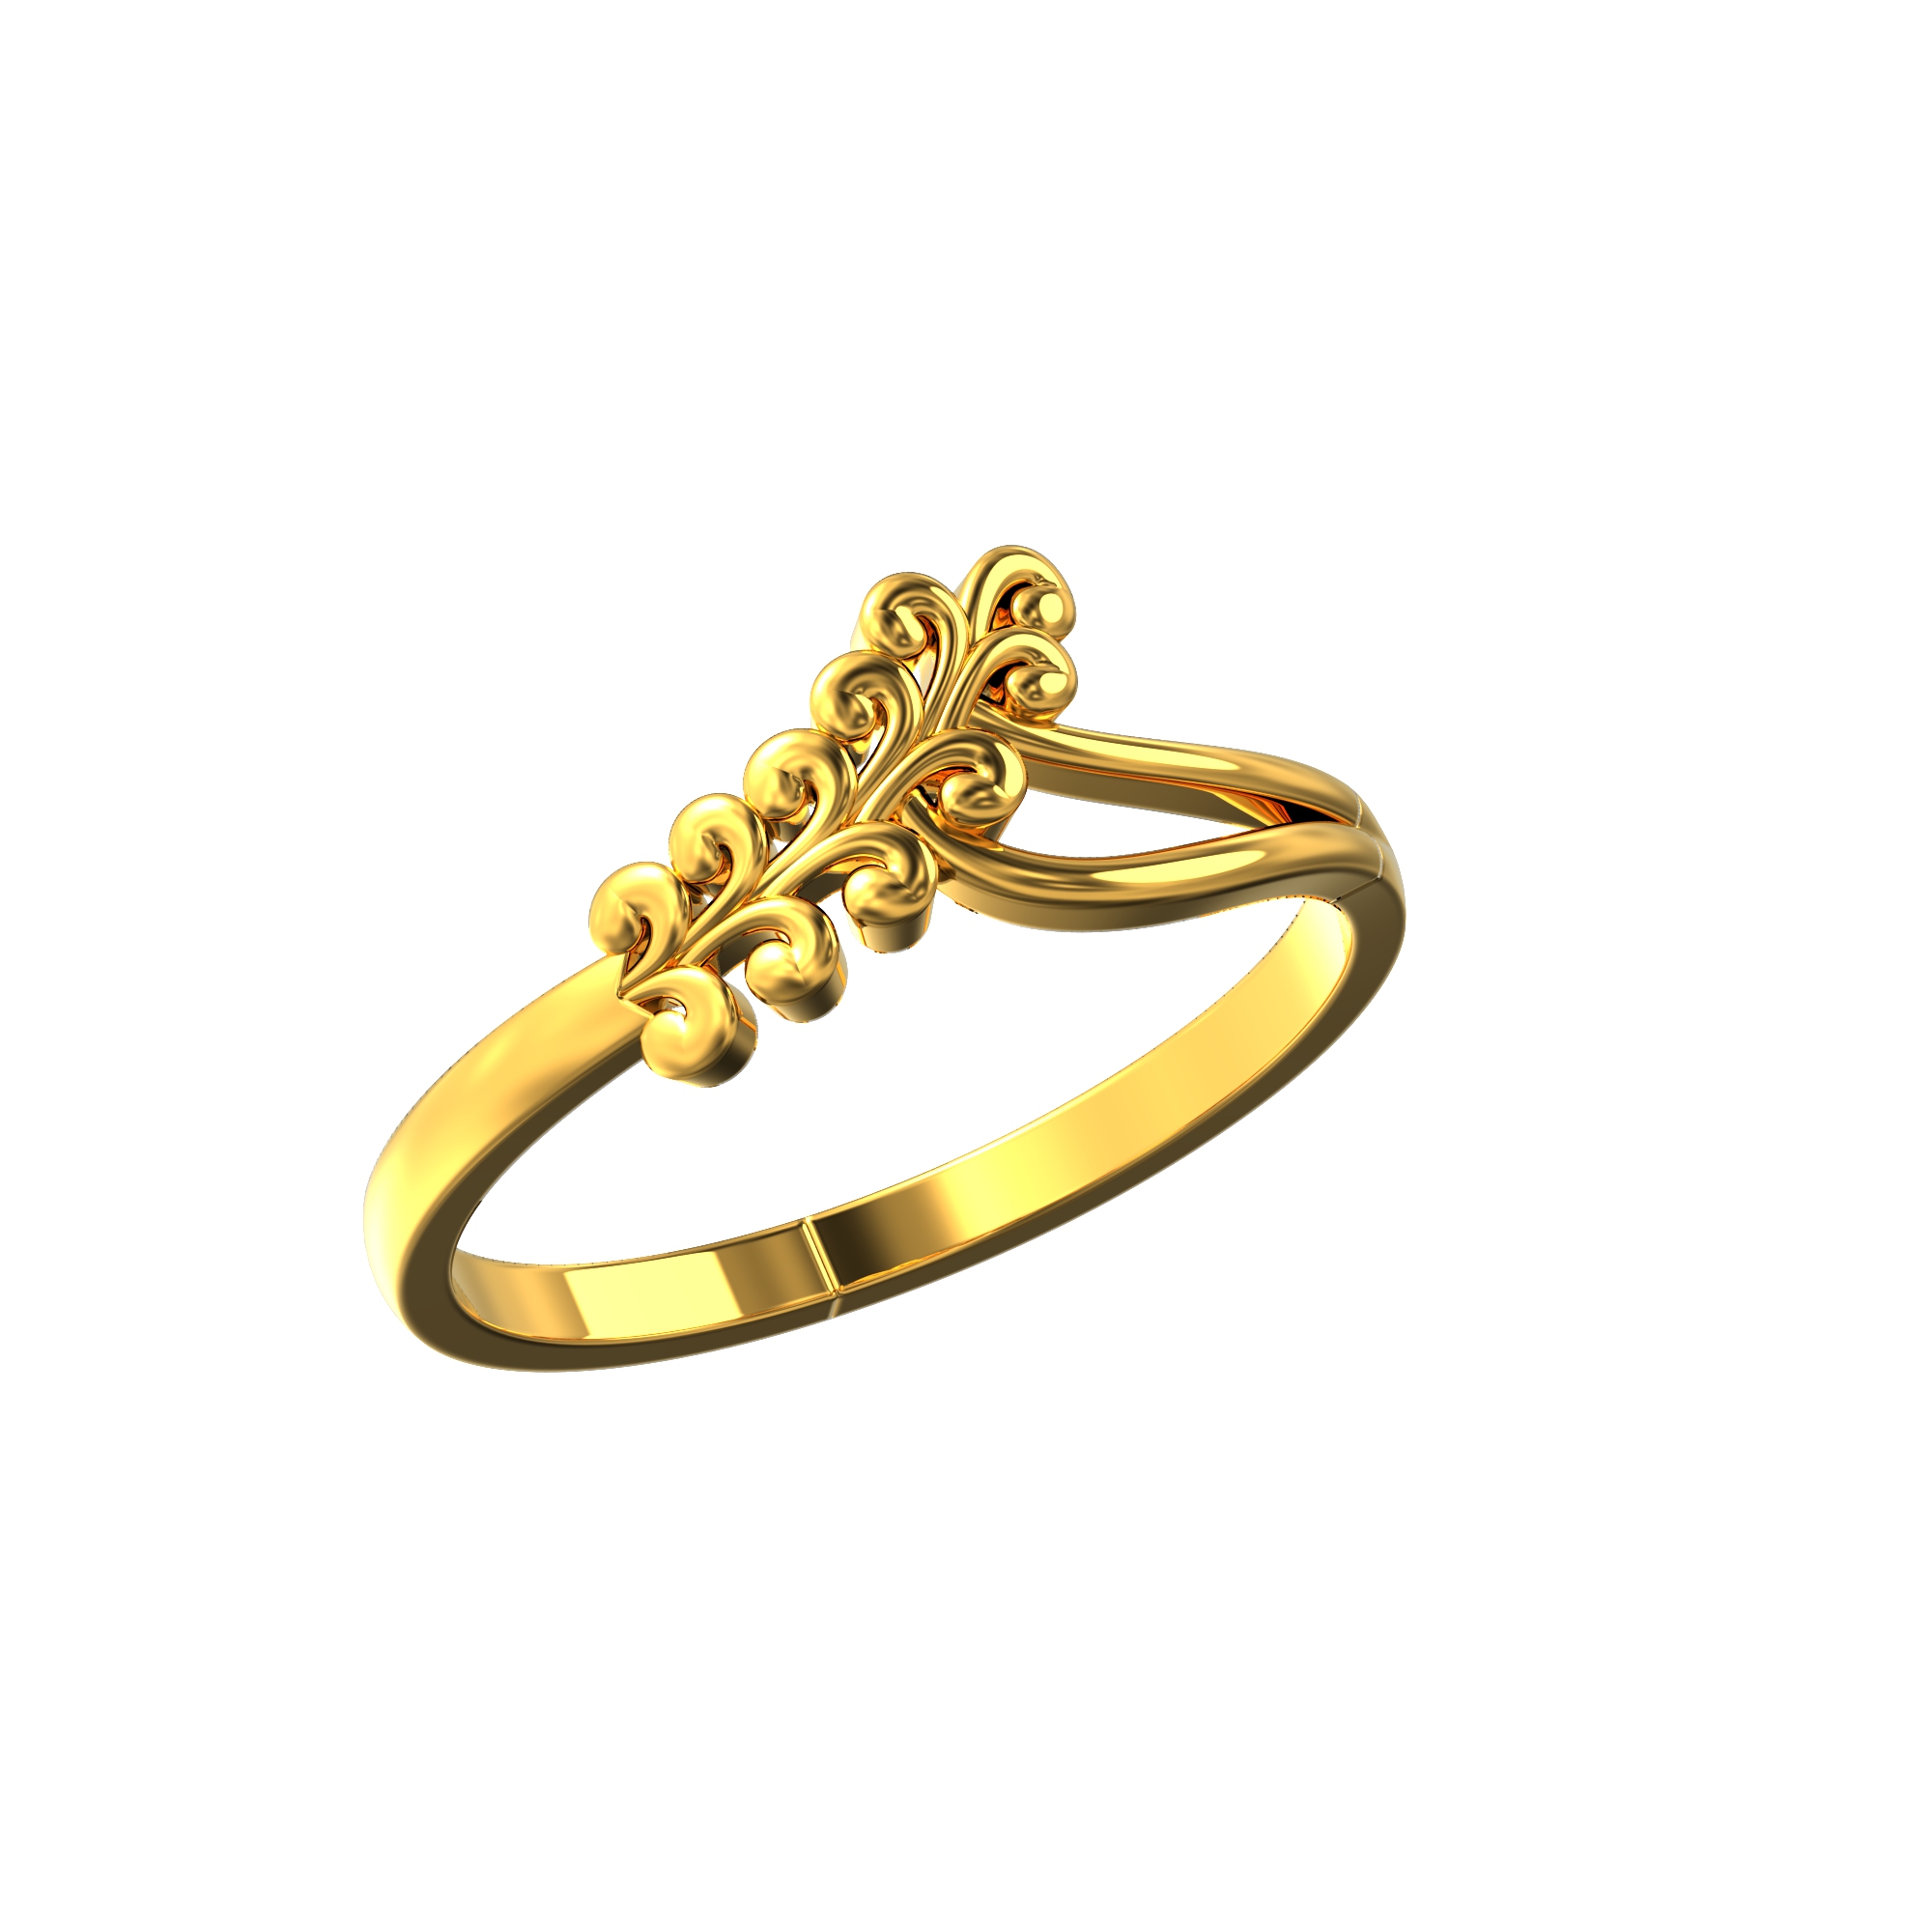 Fine Jewelry 18 Kt,22 Kt Real Solid Yellow Gold Ring Hallmark Handmade  Filigree Flower Women's Wedding Classy Ring for Women's - Etsy | Beautiful gold  rings, New gold jewellery designs, Gold jewelry fashion